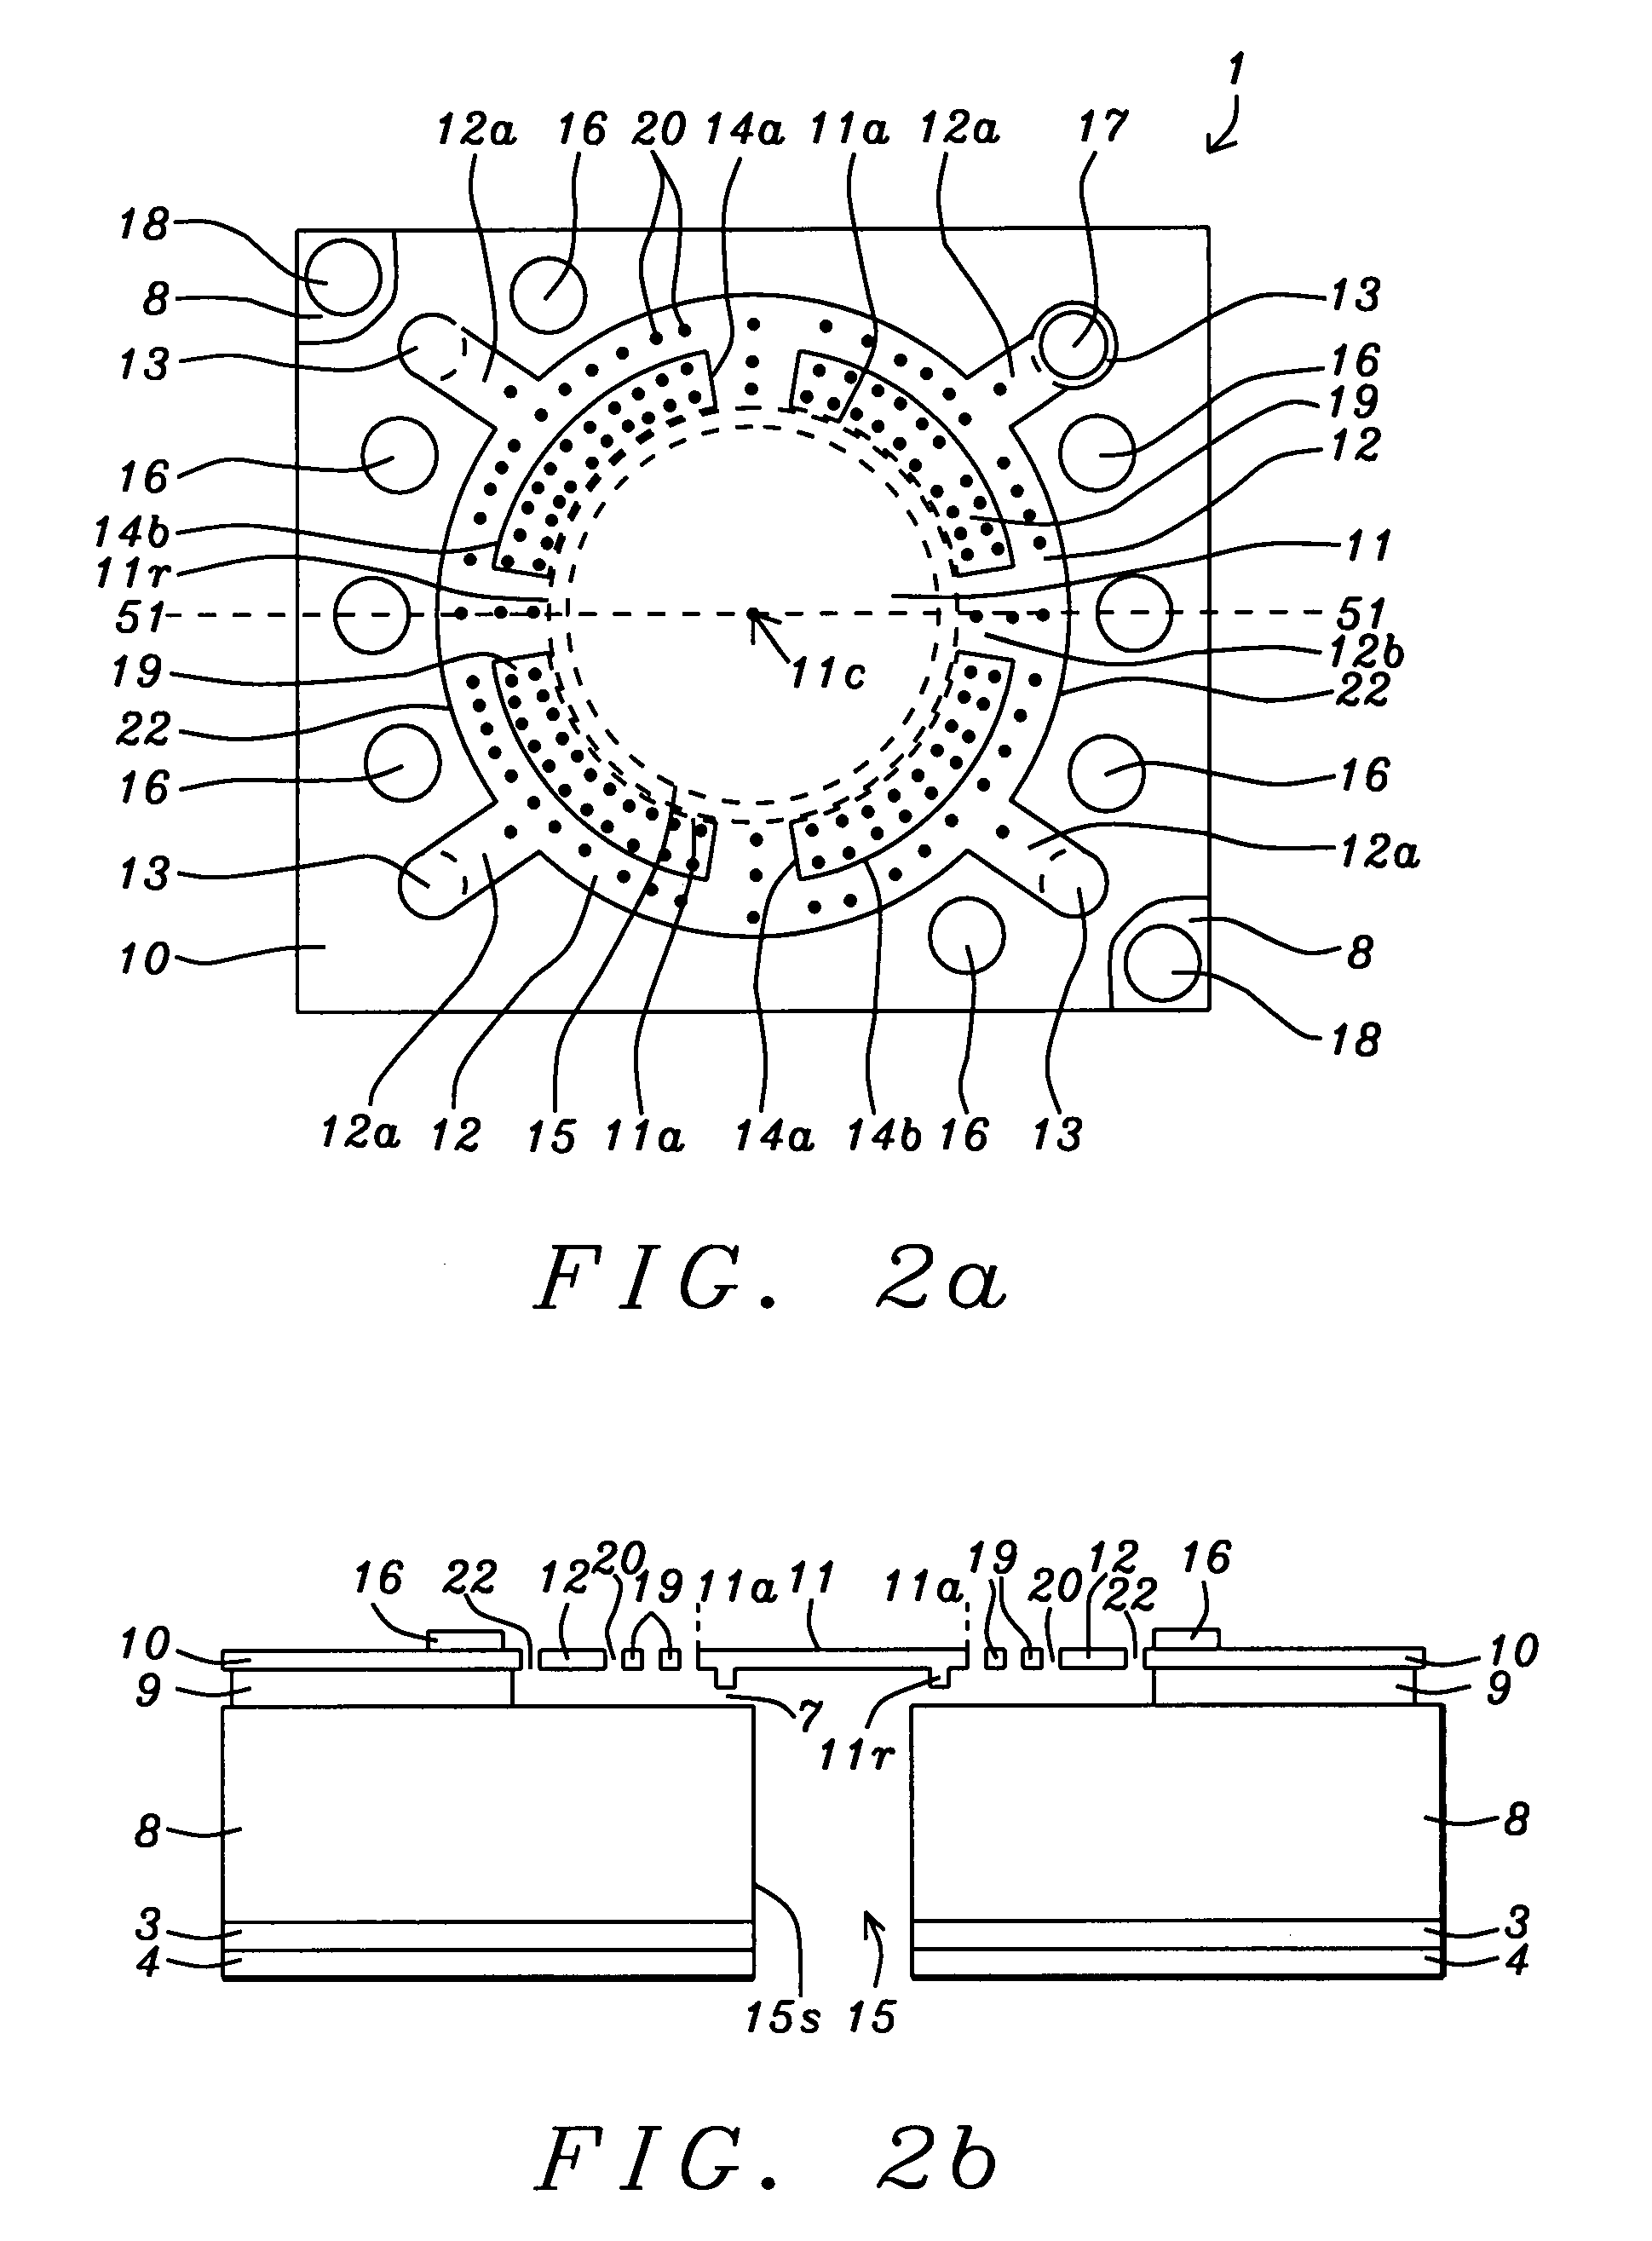 Silicon microphone with enhanced impact proof structure using bonding wires